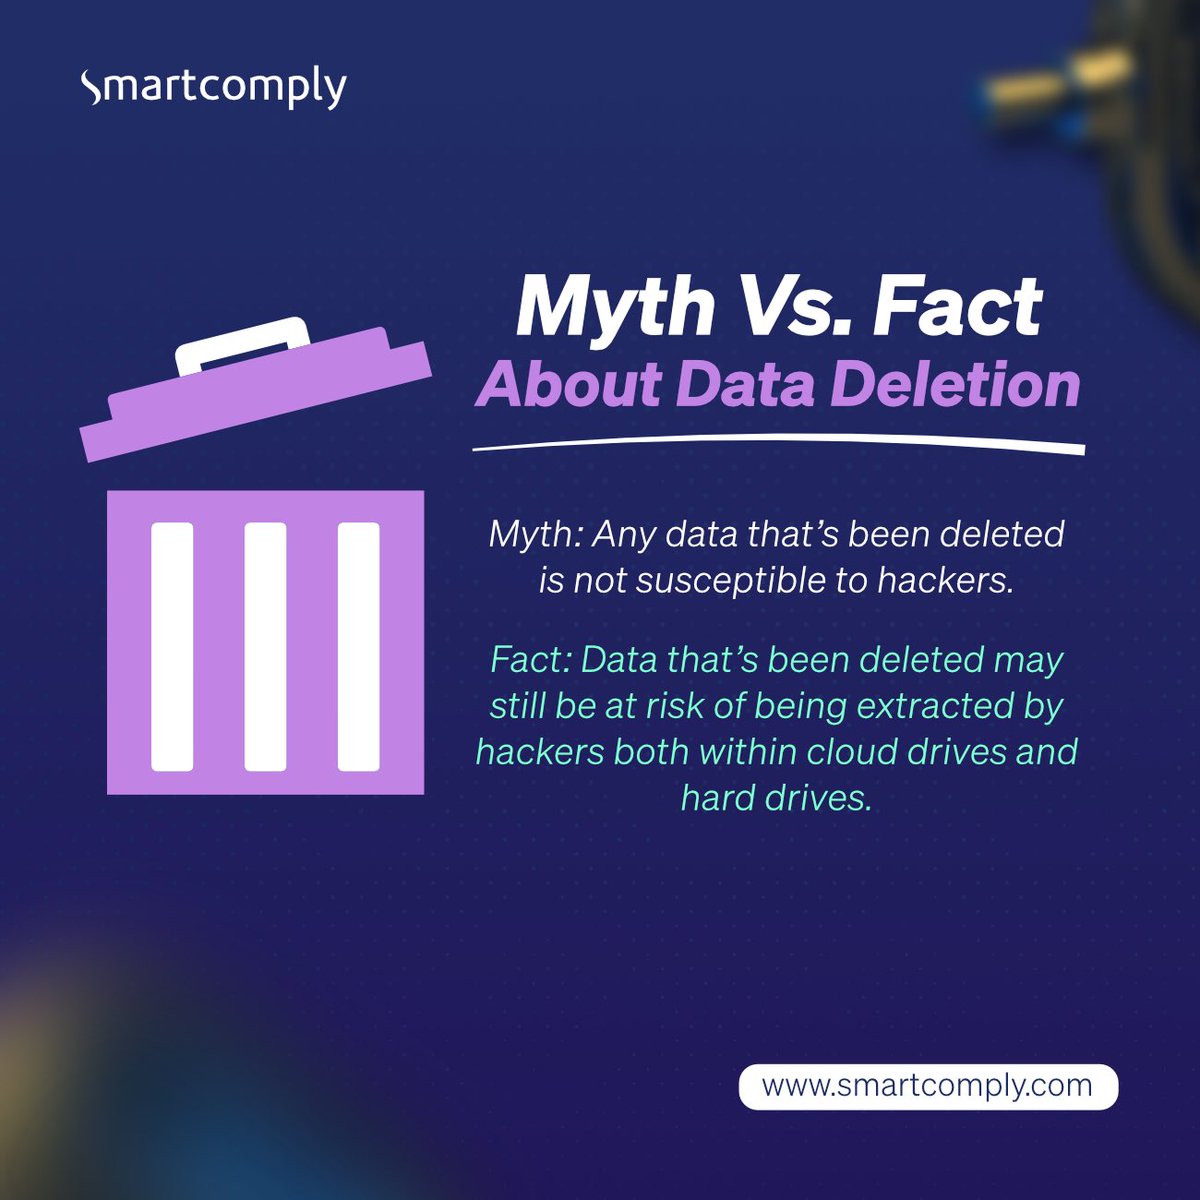 Think deleting data means it's gone for good? Think again! 

Hackers can still access deleted info, posing serious risks to your security. 

Stay informed with our latest blog! smartcomply.blogspot.com

#DataProtection #CyberSecurity #StaySecure #Smartcomply